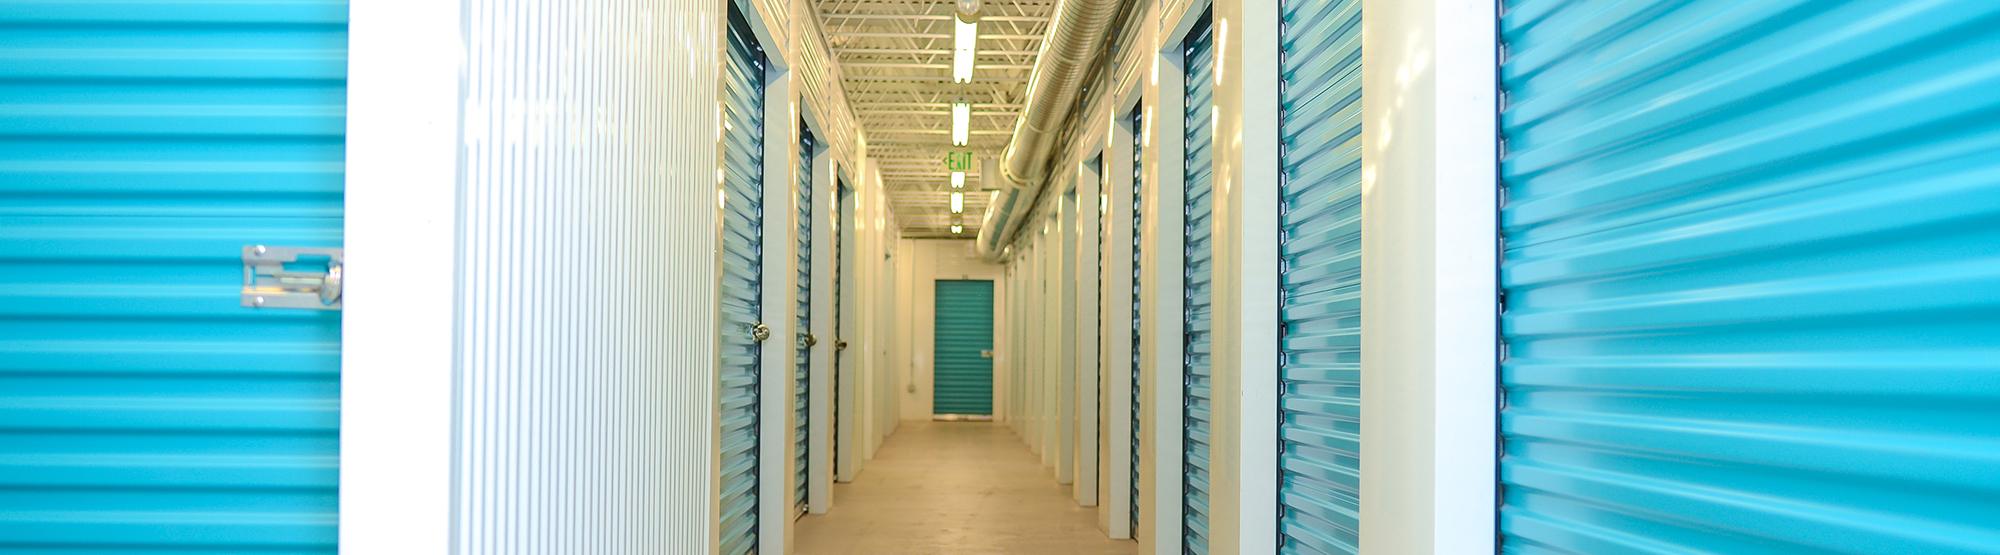 Interior Self Storage in Englewood, CO